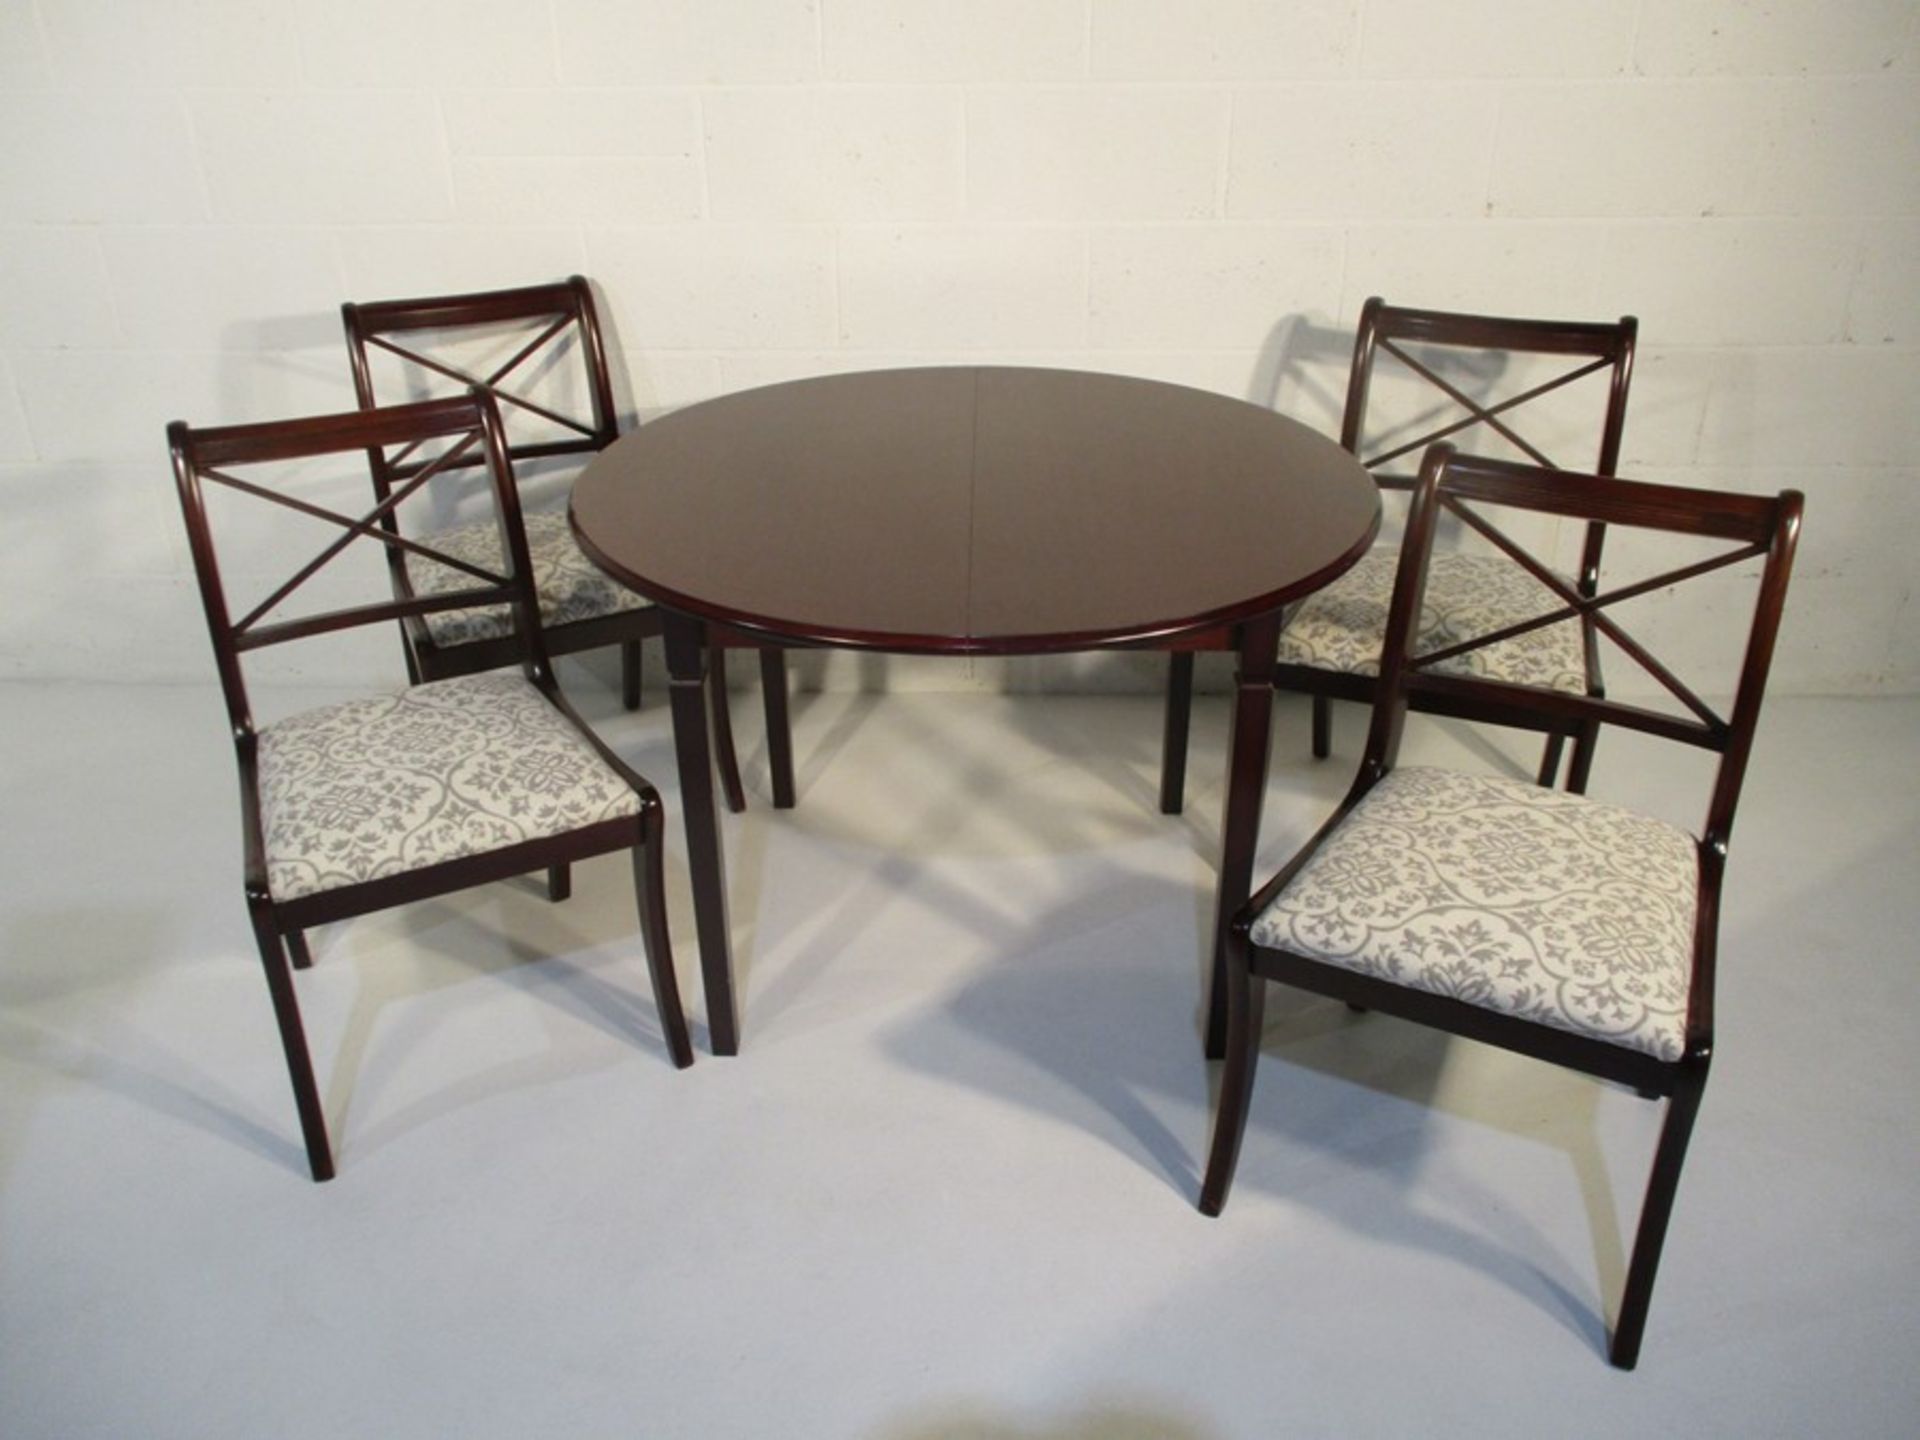 A circular extending dining table along with four matching chairs